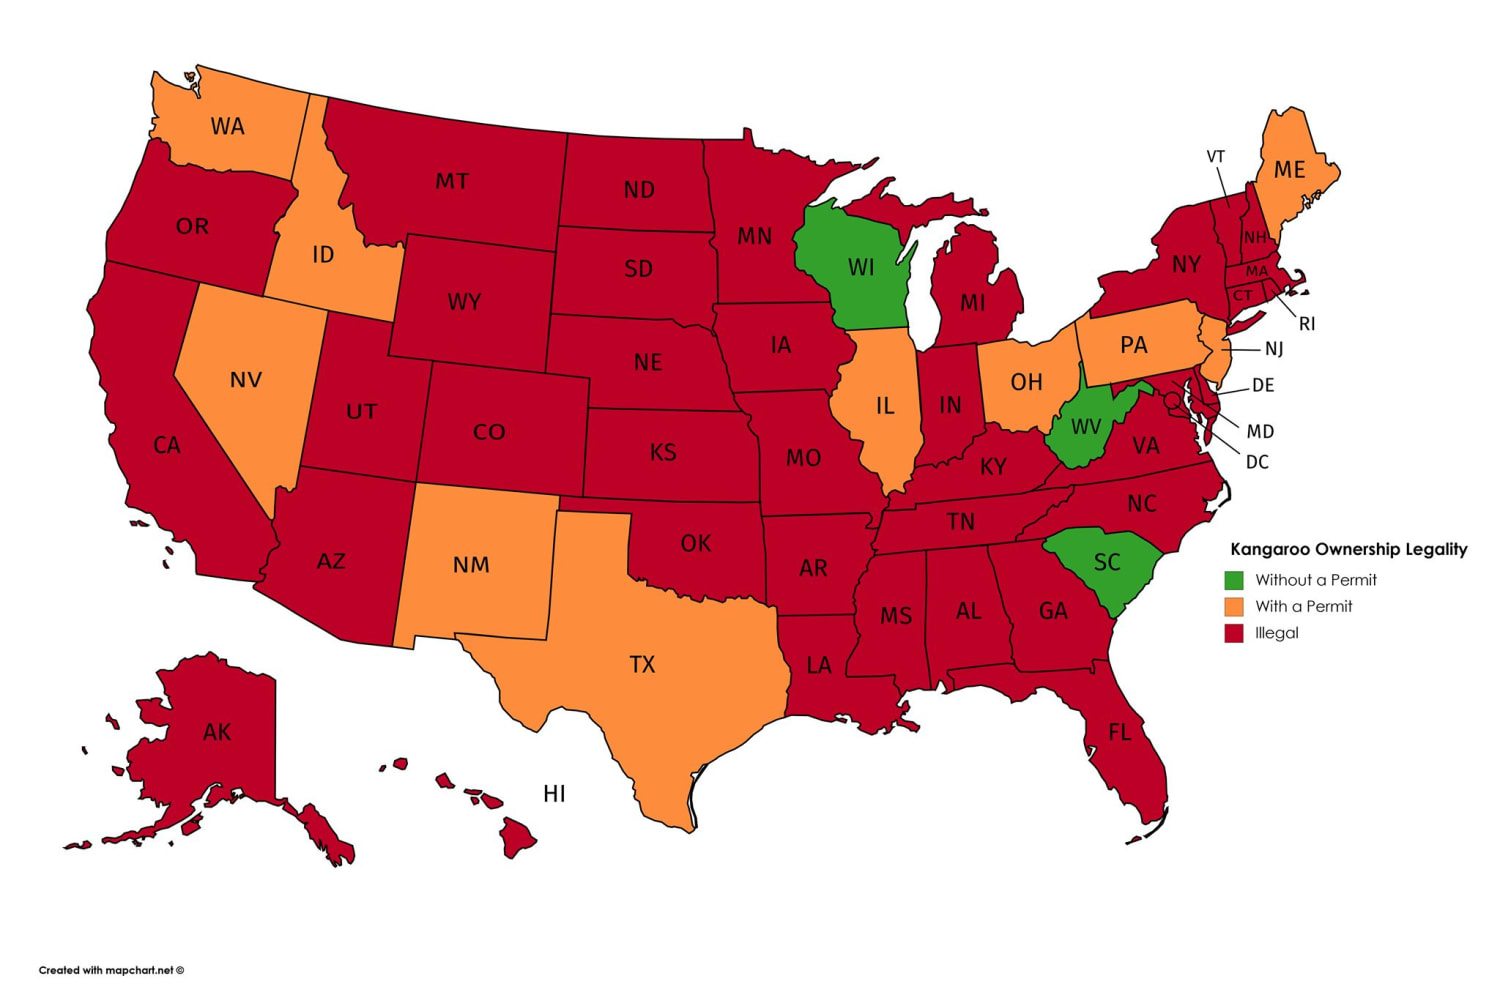 State-by-state guide to Kangaroo Ownership Legality.